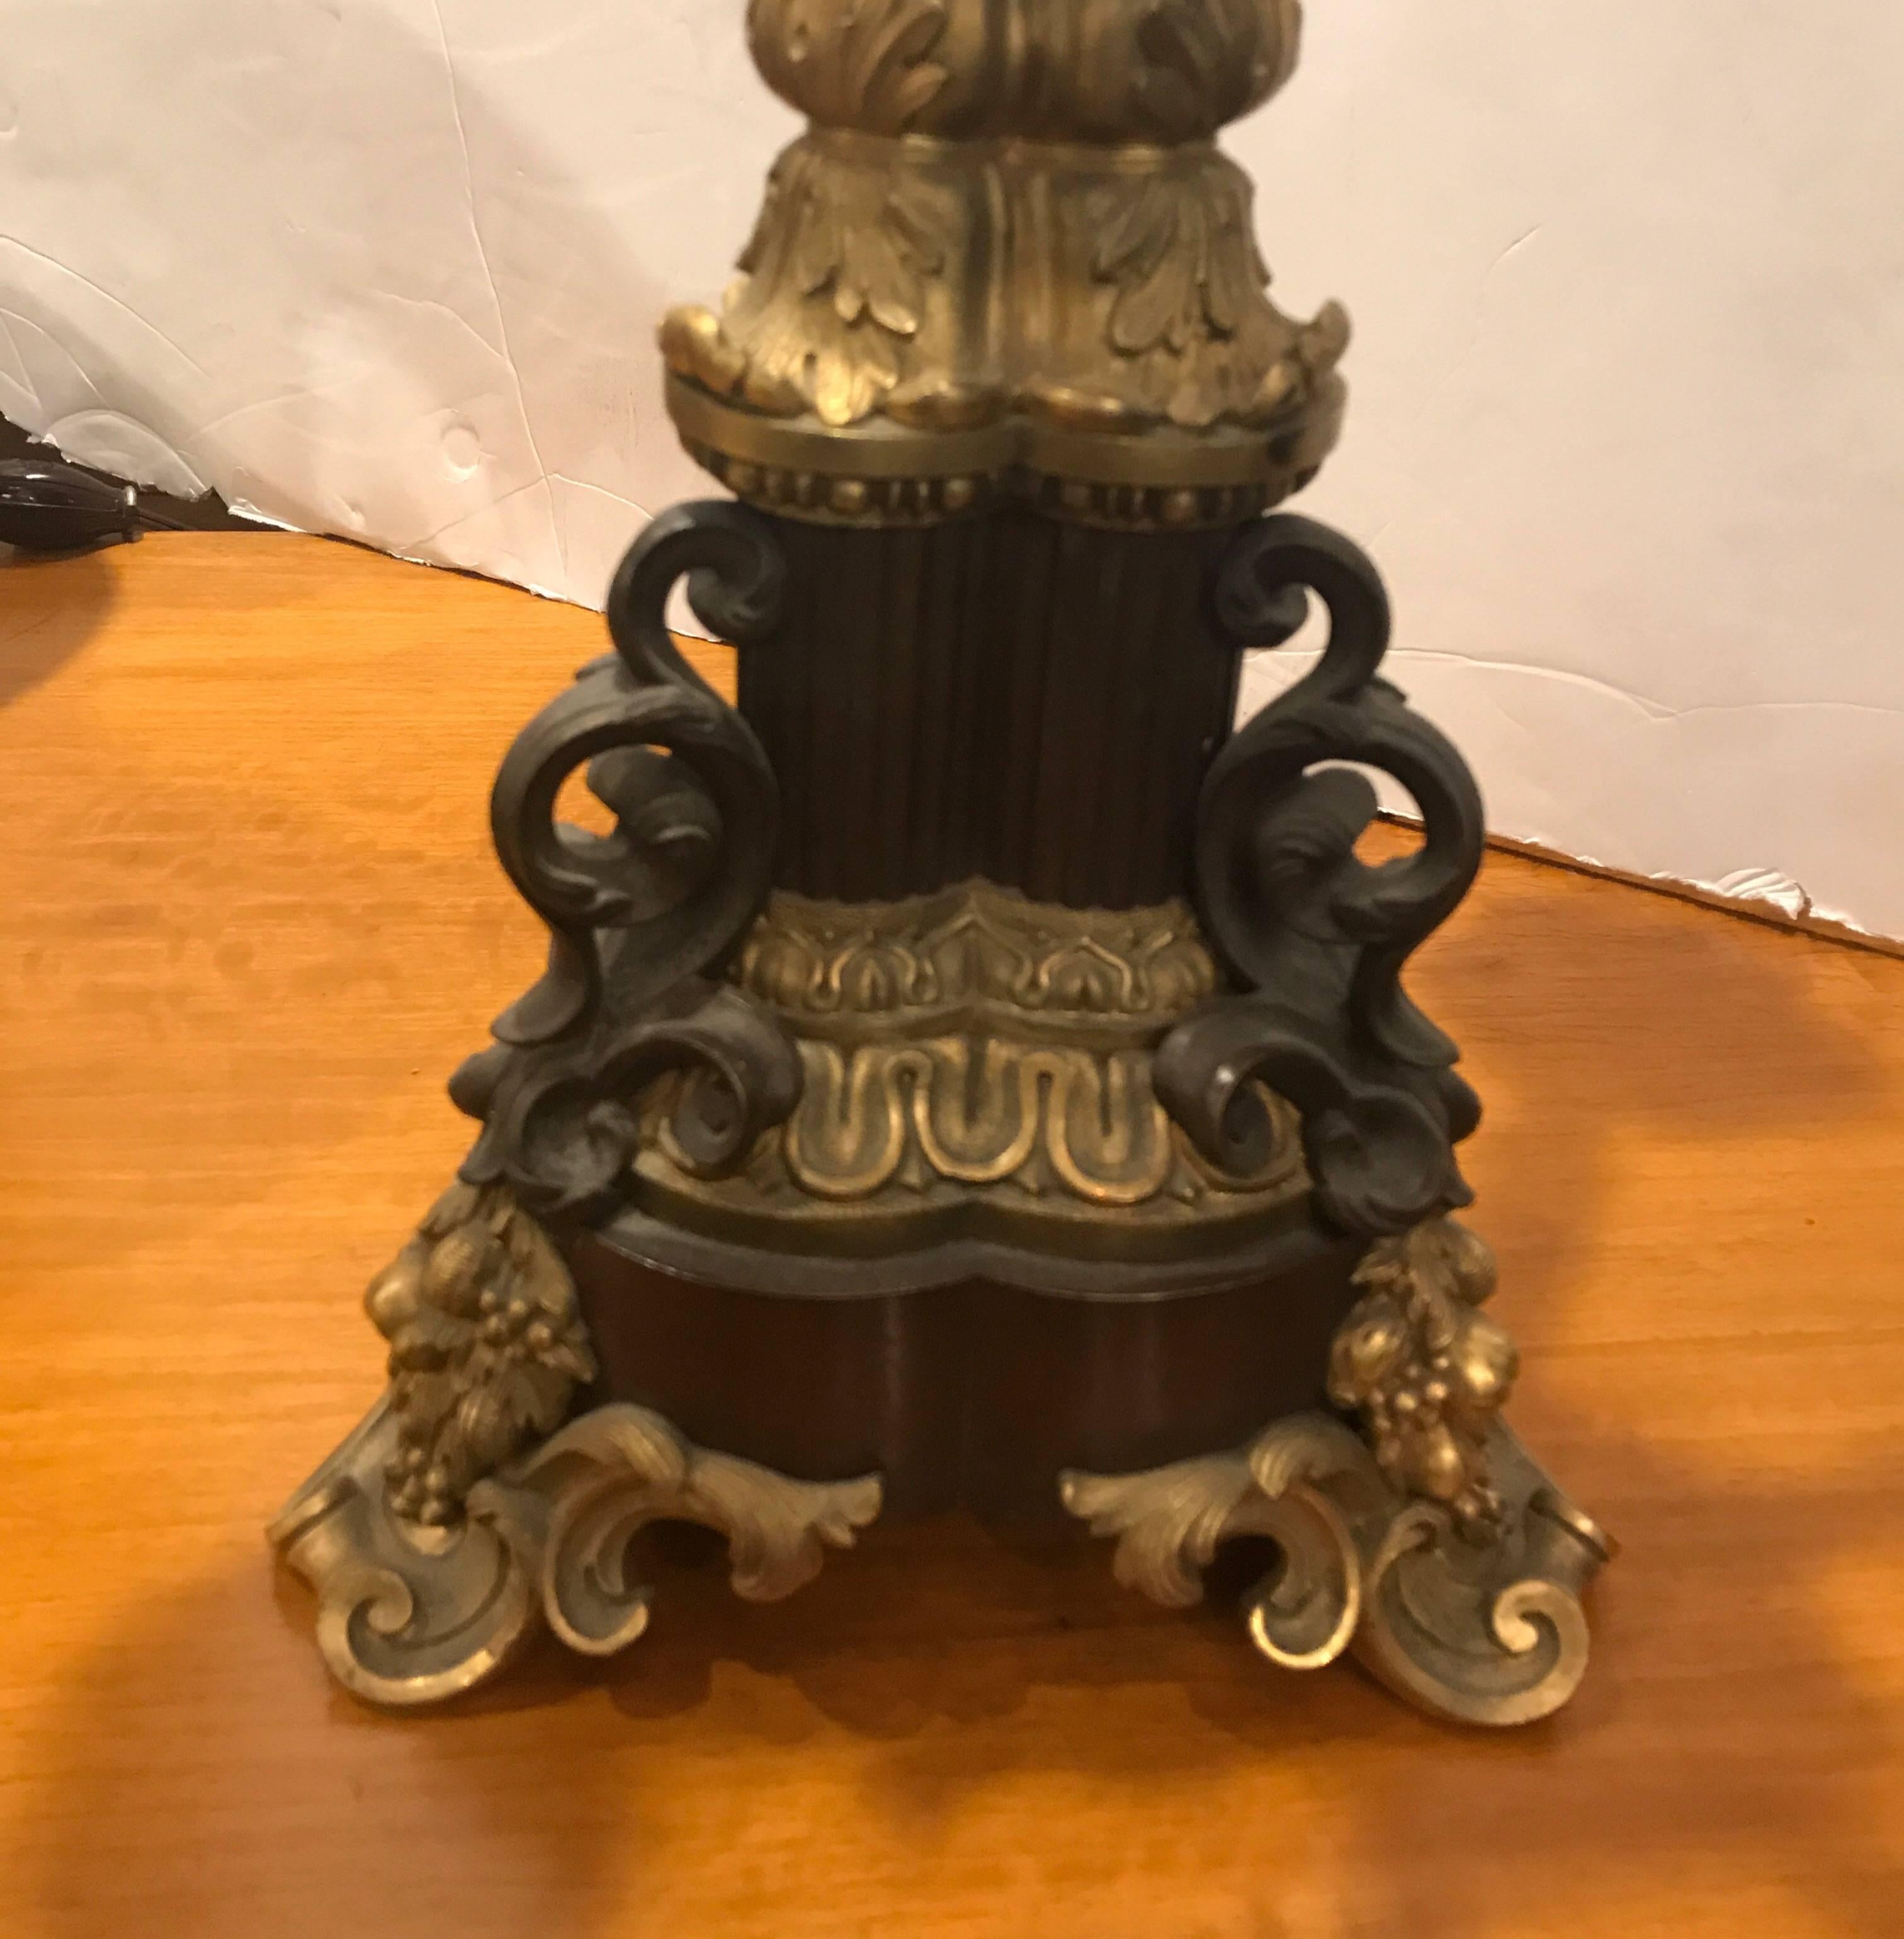 Impressive patinated bronze and ormolu-mounted tall candelabra now electrified. The 19th century candelabra with original finish converted to electric, circa 1920. The elaborate top with triple rod center column resting of finely cast ormolu feet.